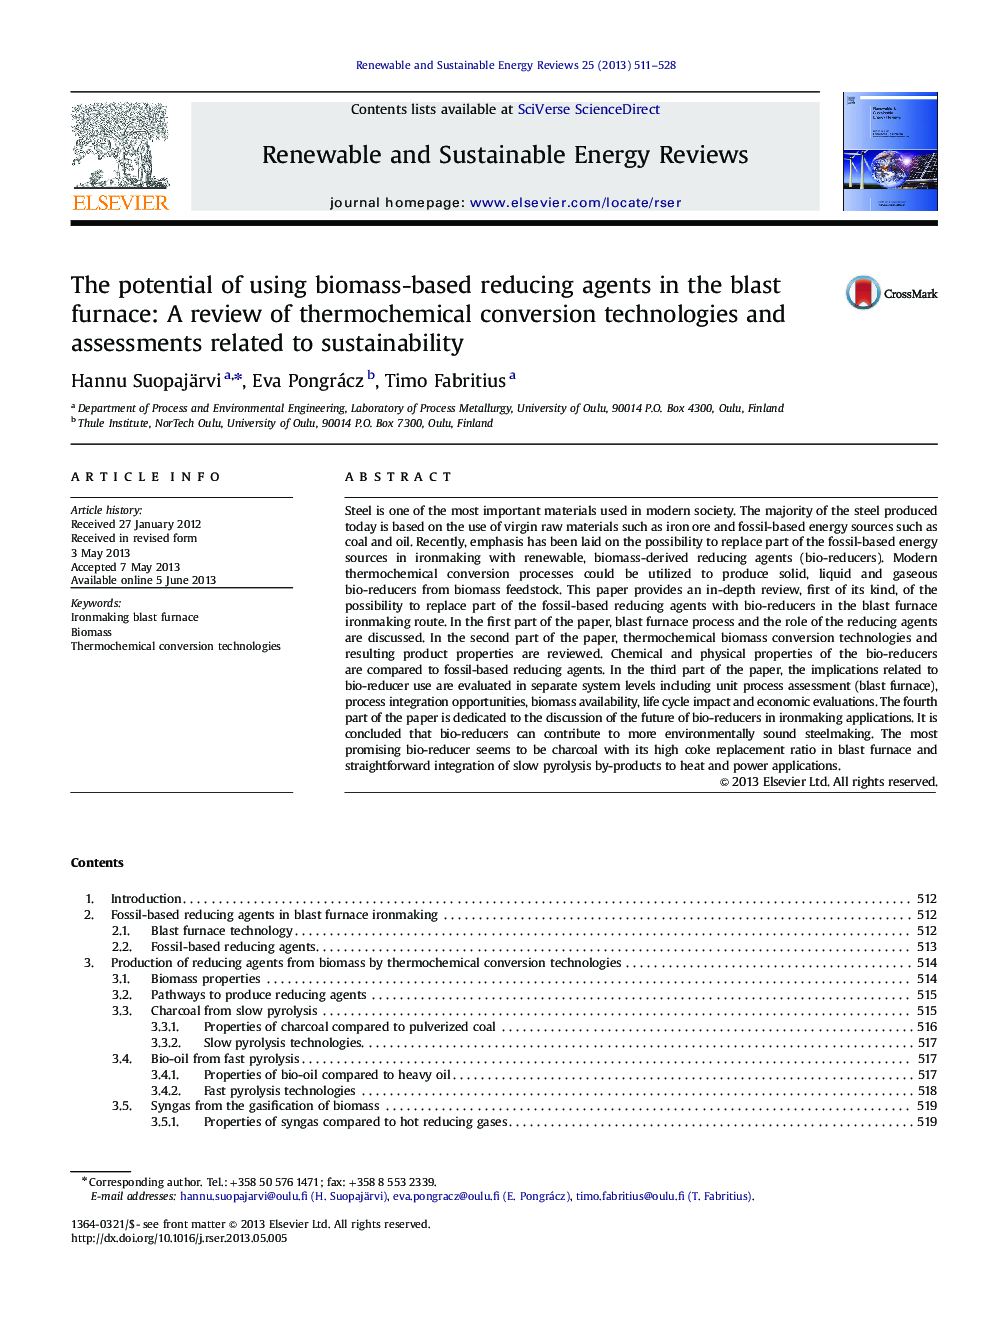 The potential of using biomass-based reducing agents in the blast furnace: A review of thermochemical conversion technologies and assessments related to sustainability